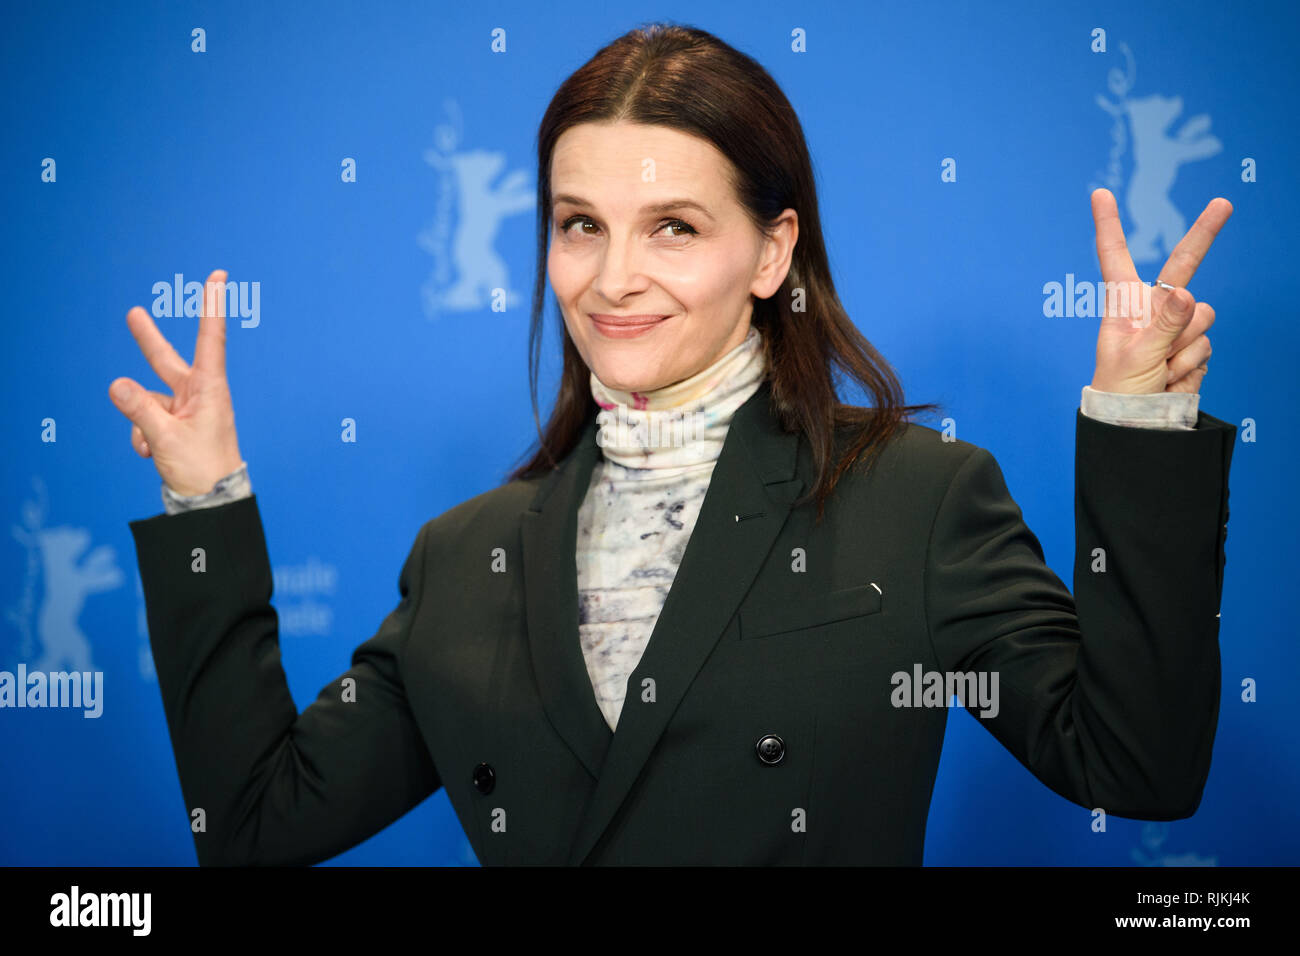 Berlin, Germany. 07th Feb, 2019. 69th Berlinale, photo shoot: Juliette Binoche, actress and president of the Berlinale jury. Credit: Gregor Fischer/dpa/Alamy Live News Credit: dpa picture alliance/Alamy Live News Credit: dpa picture alliance/Alamy Live News Stock Photo